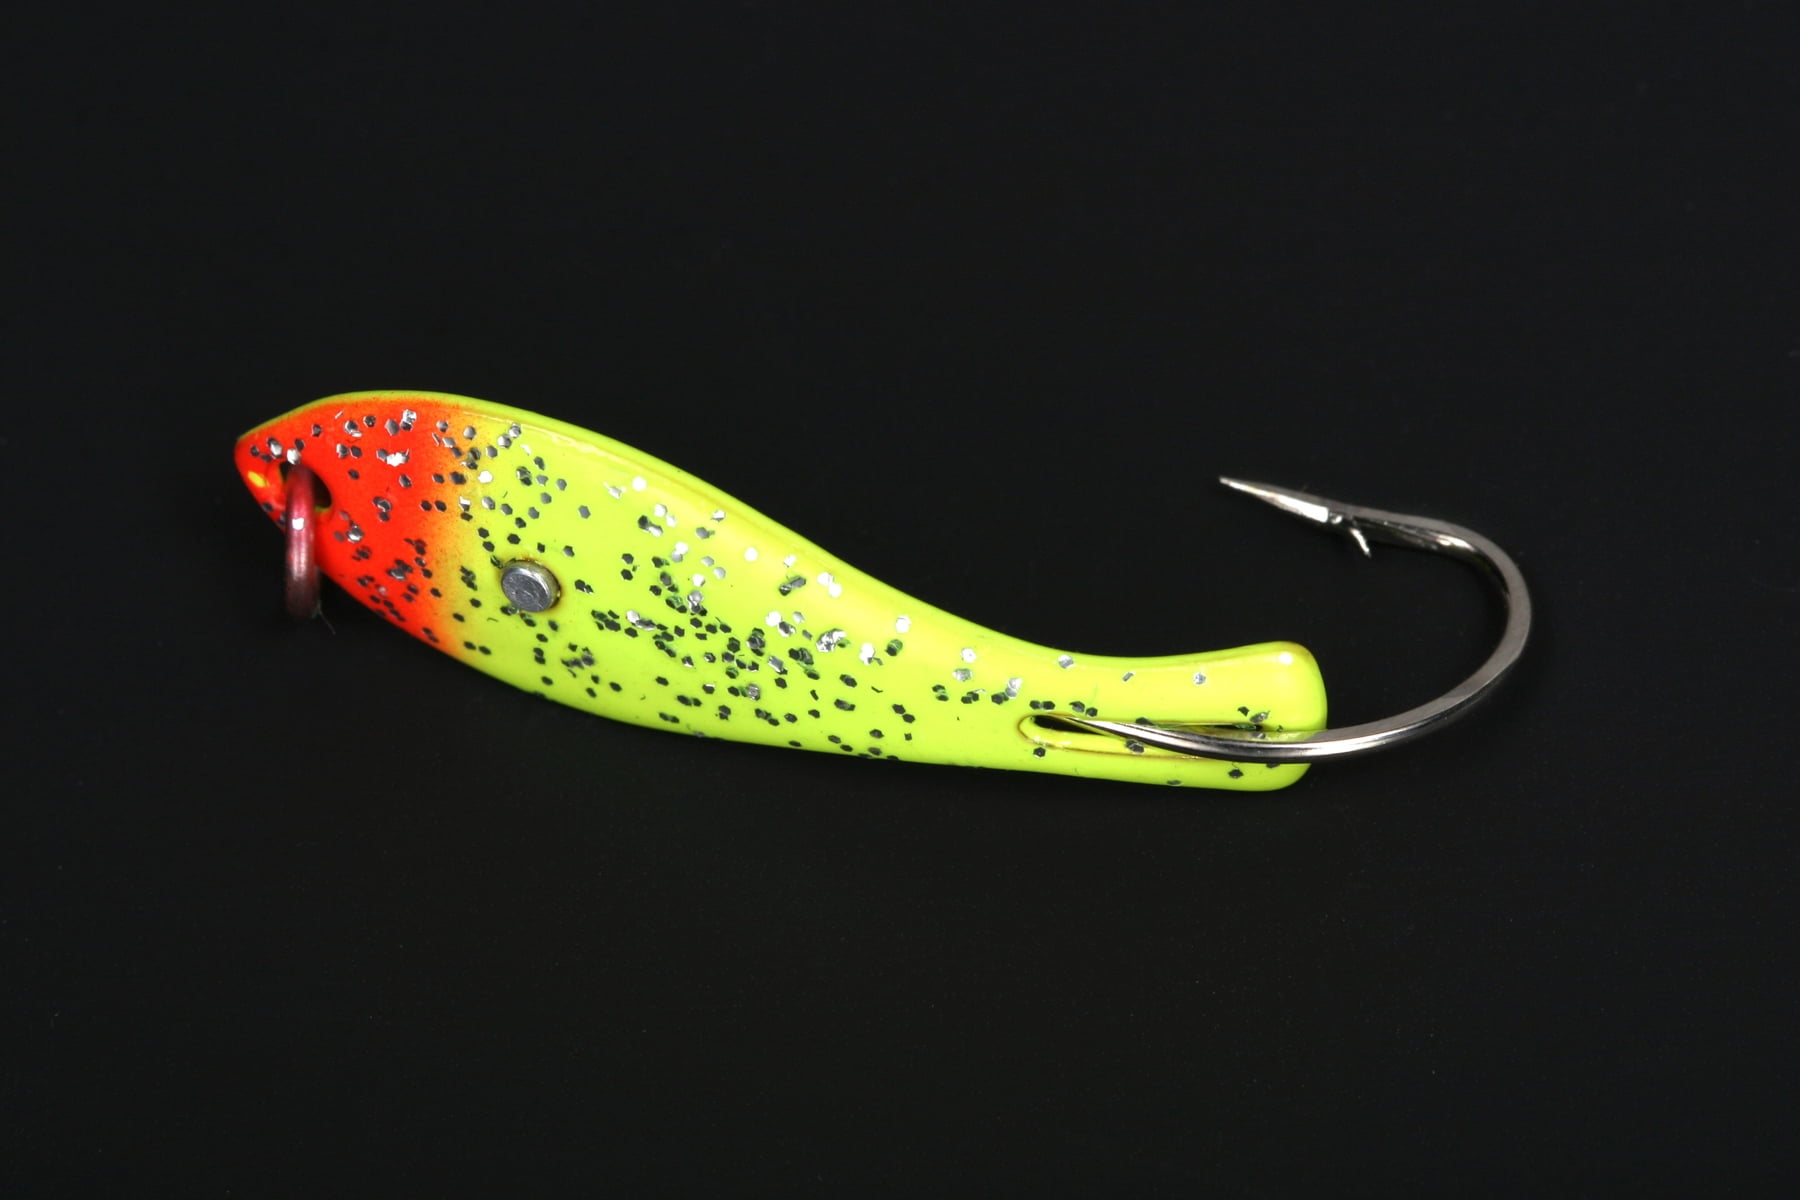 Nungesser Saltwater Shad Spoon Fishing Lure, Red & Yellow, 1 1/2